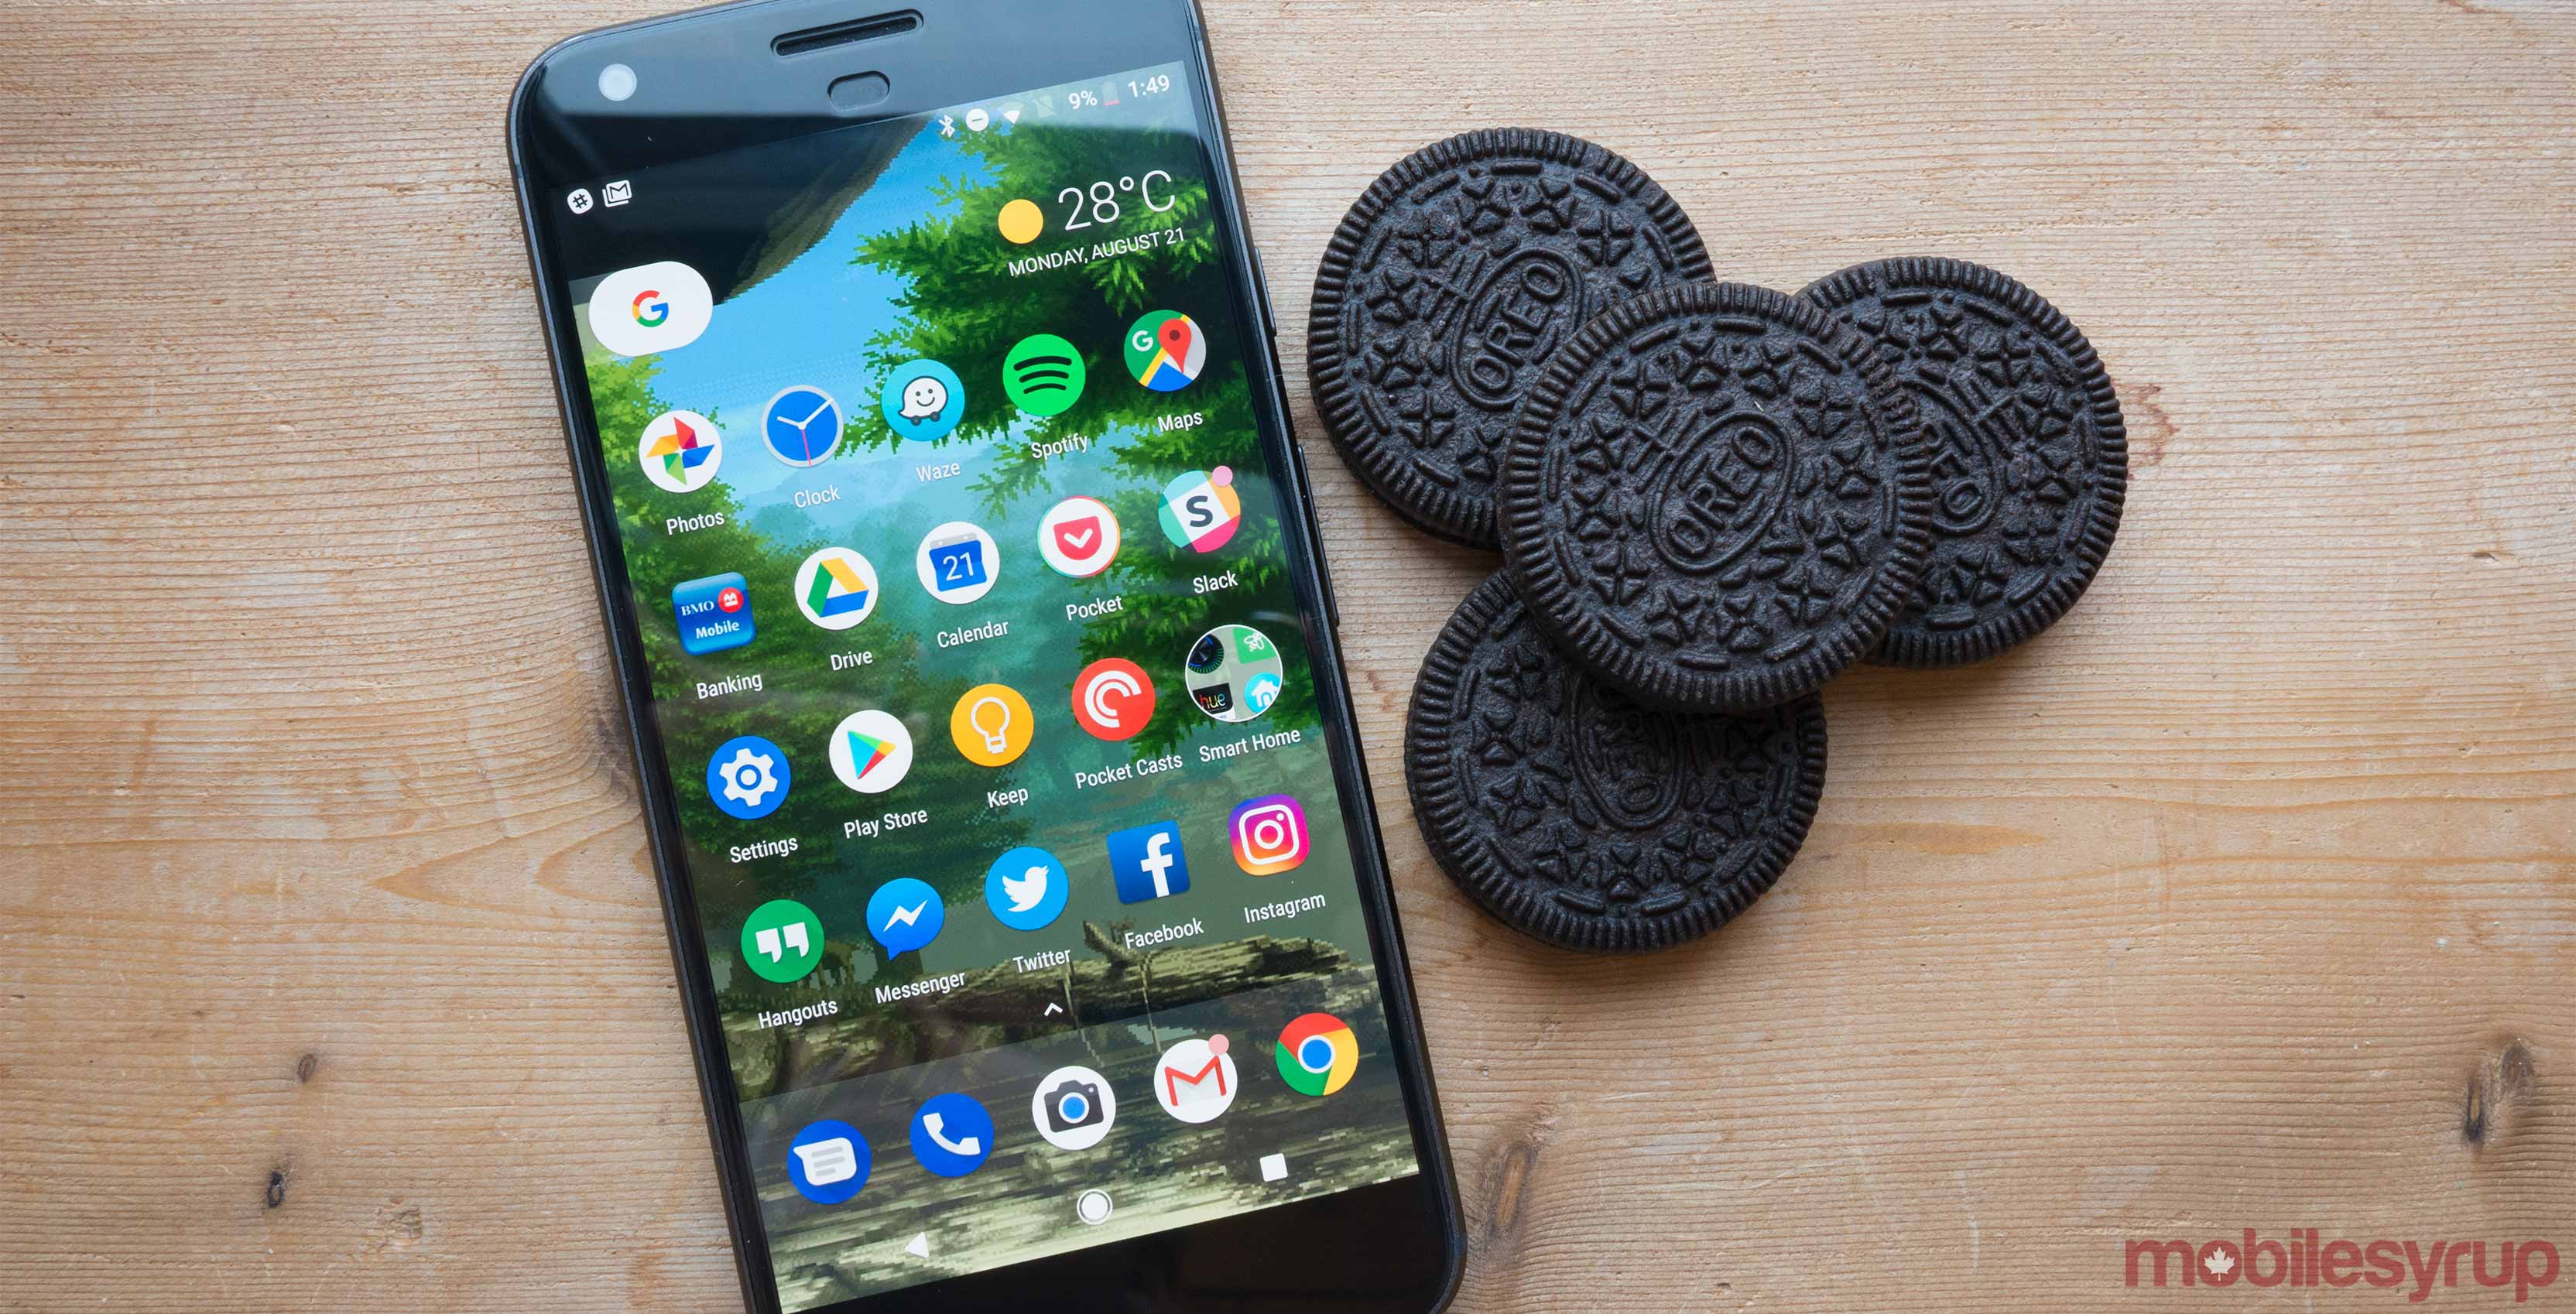 Pixel XL on table with Oreos